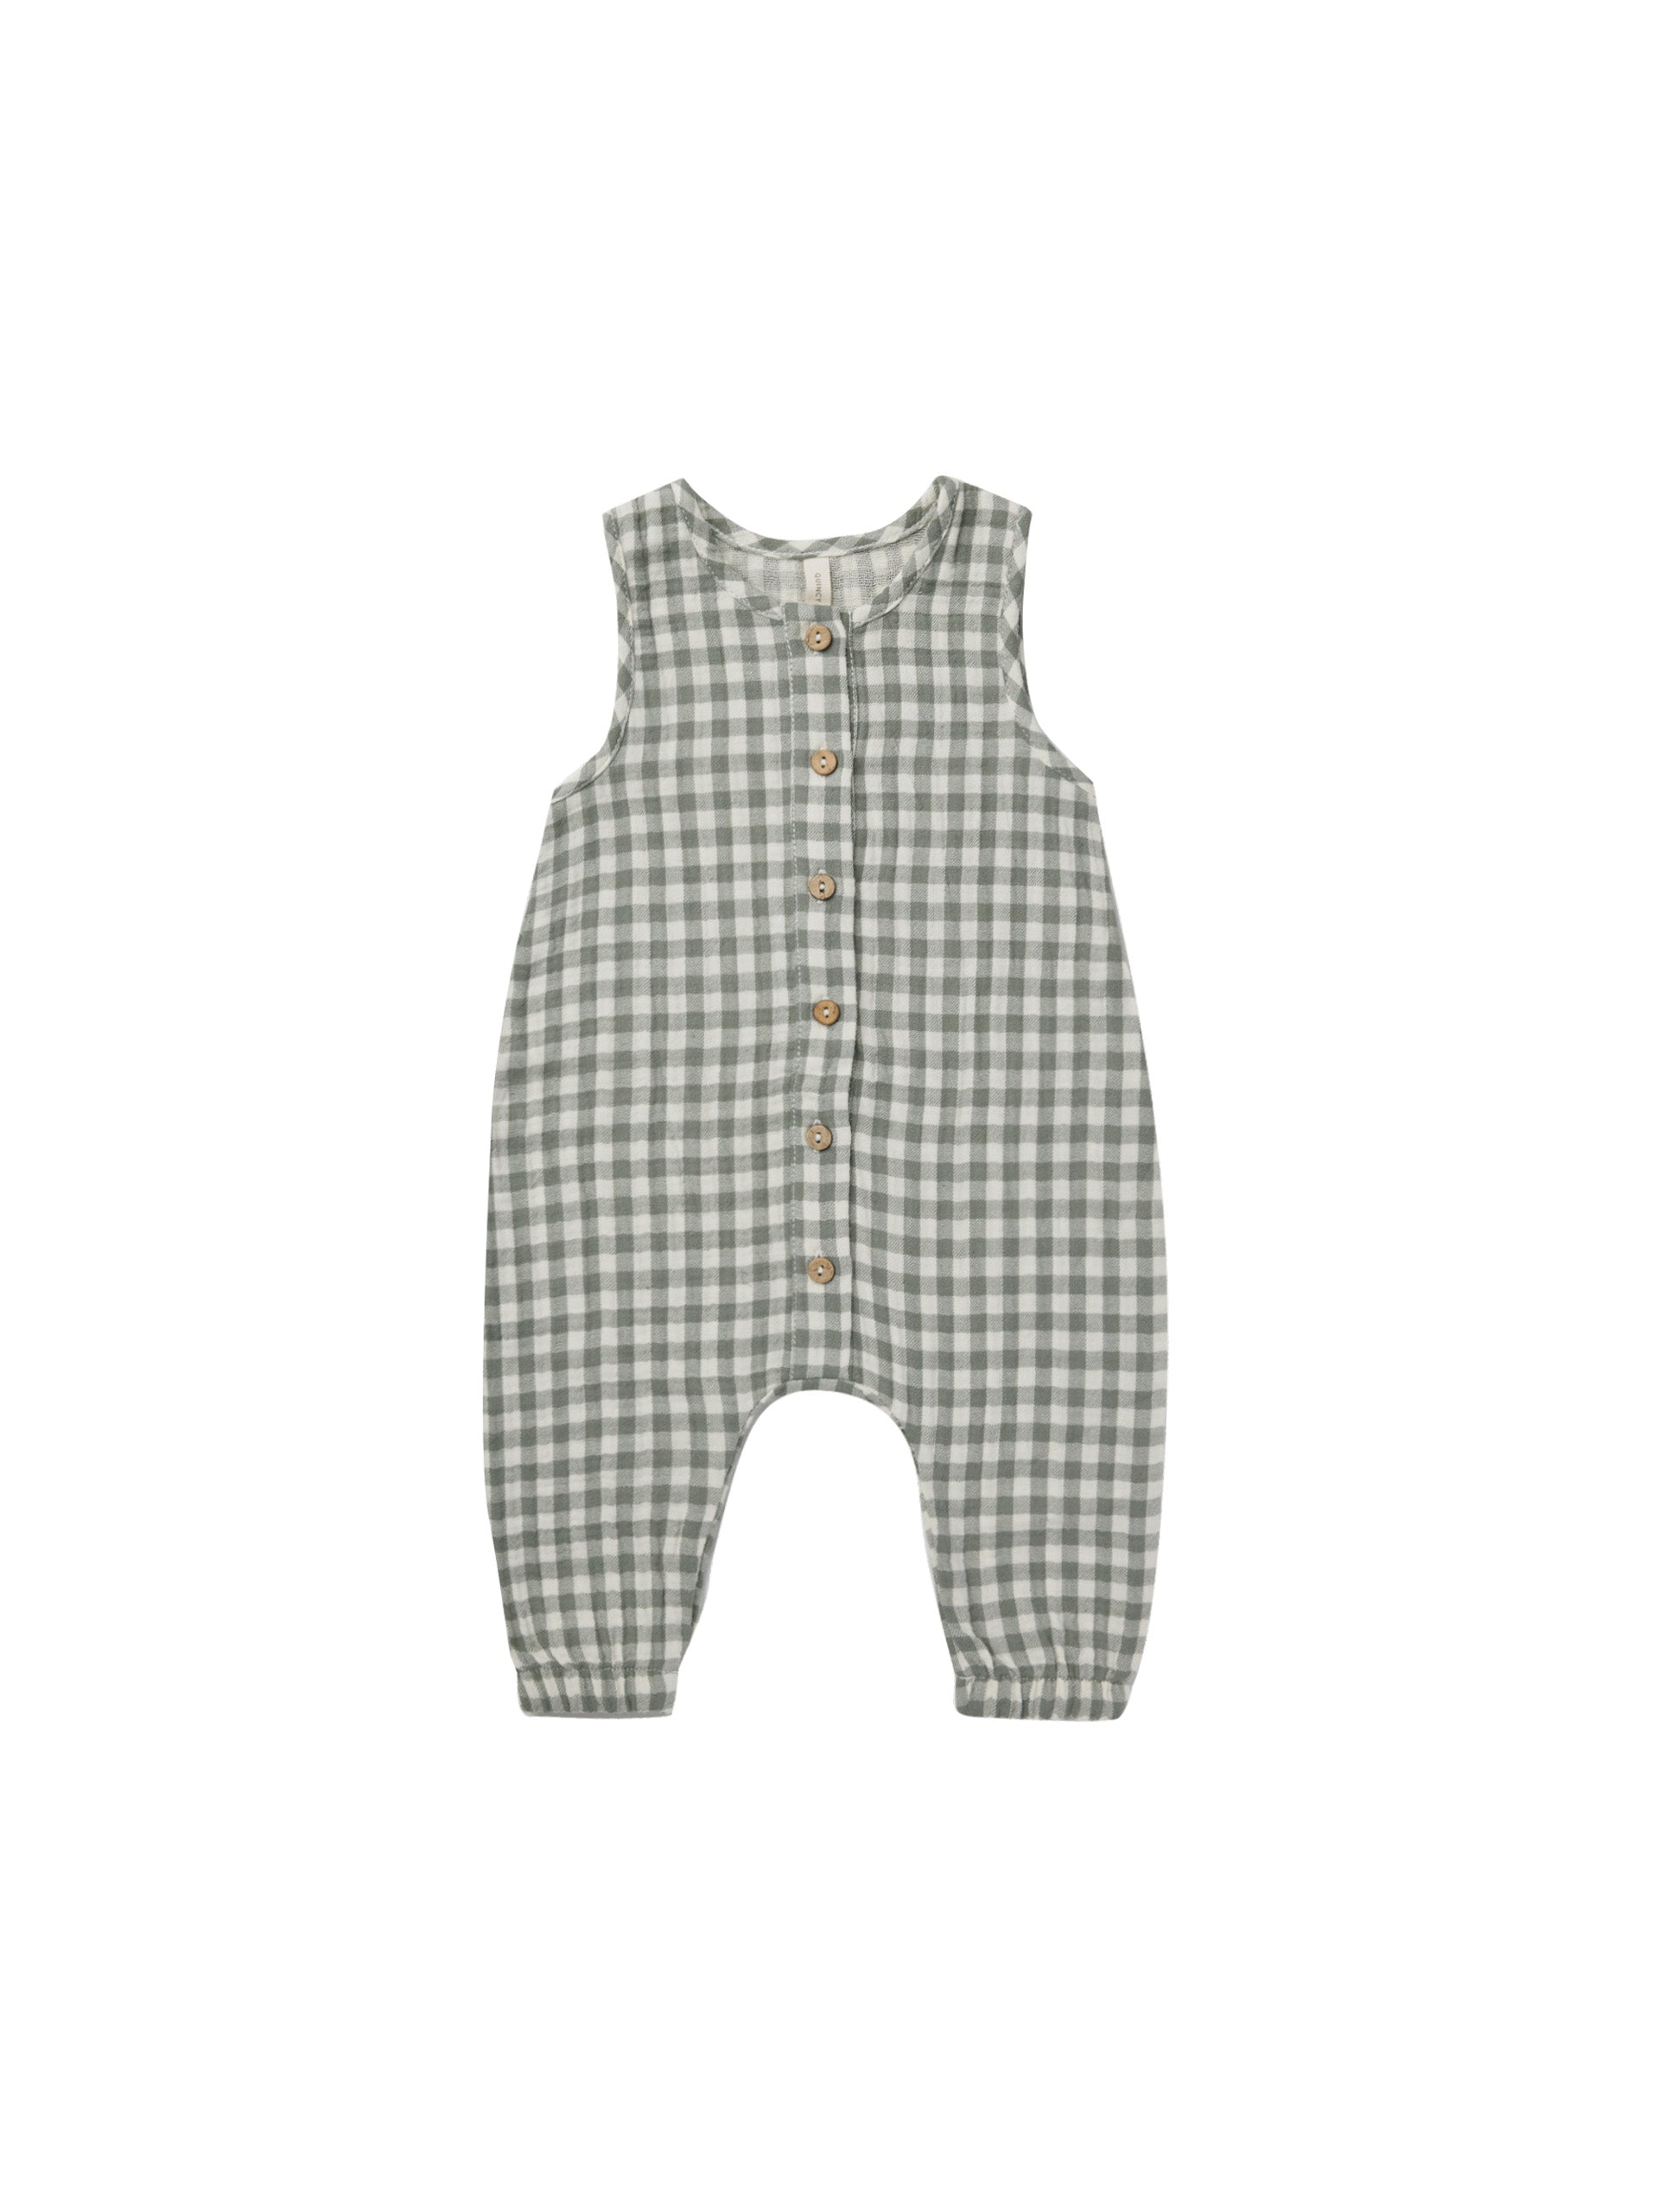 Baby woven jumpsuit in green gingham print